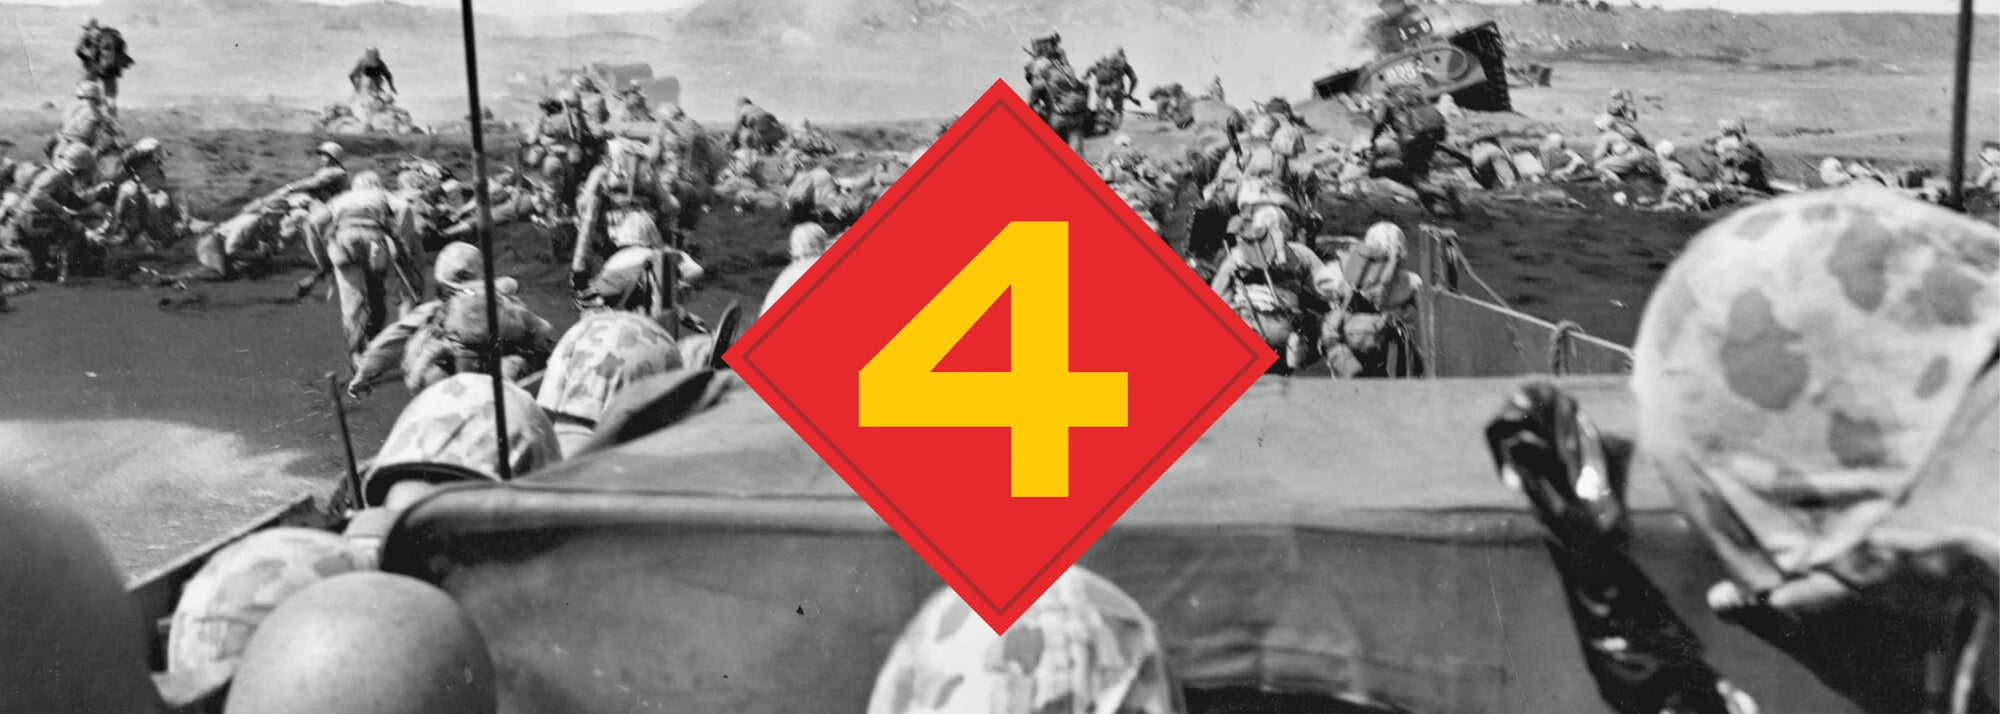 4th Marine Division Landing on the Island of Iwo Jima during WW2 1945